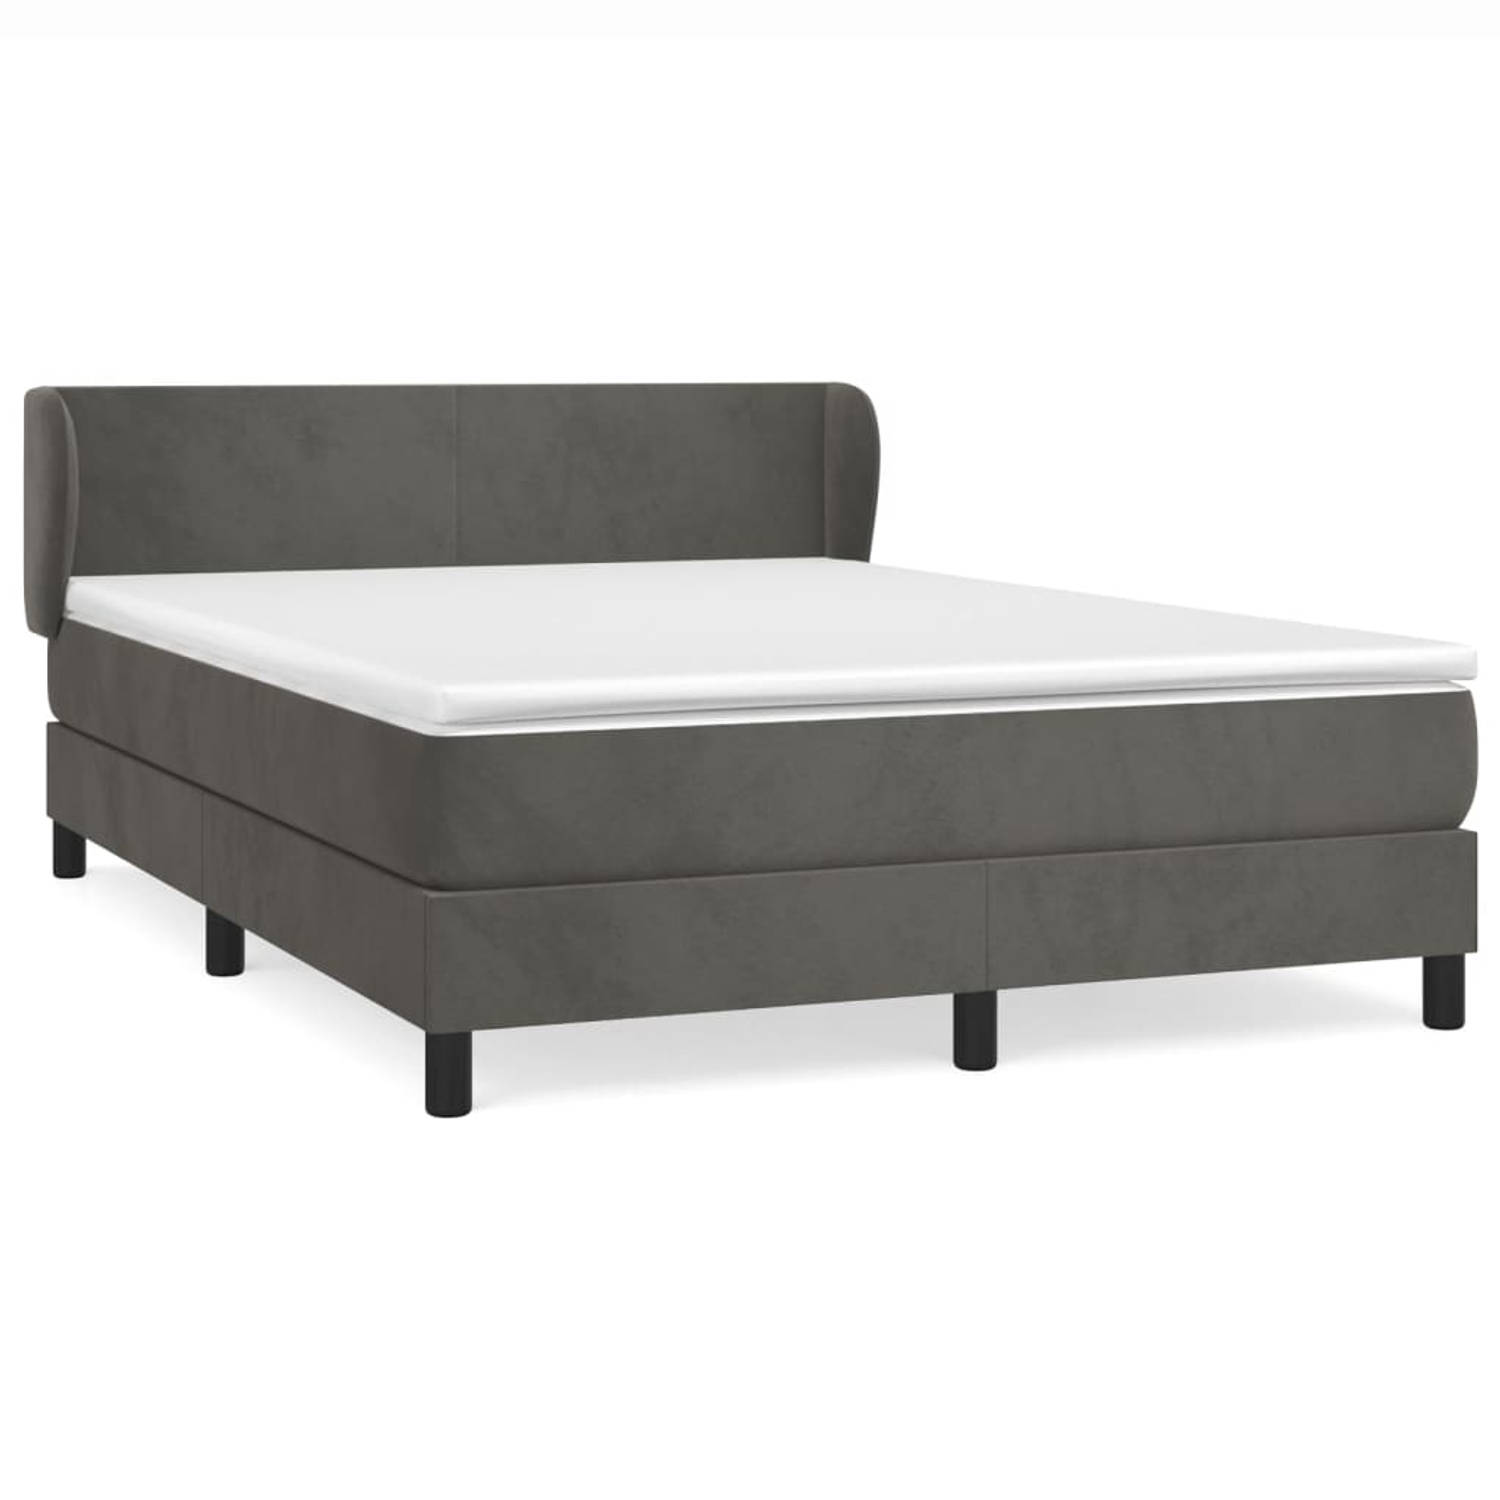 The Living Store Boxspringbed - Comfort - Bed - 203 x 147 x 78/88 cm - Donkergrijs fluweel